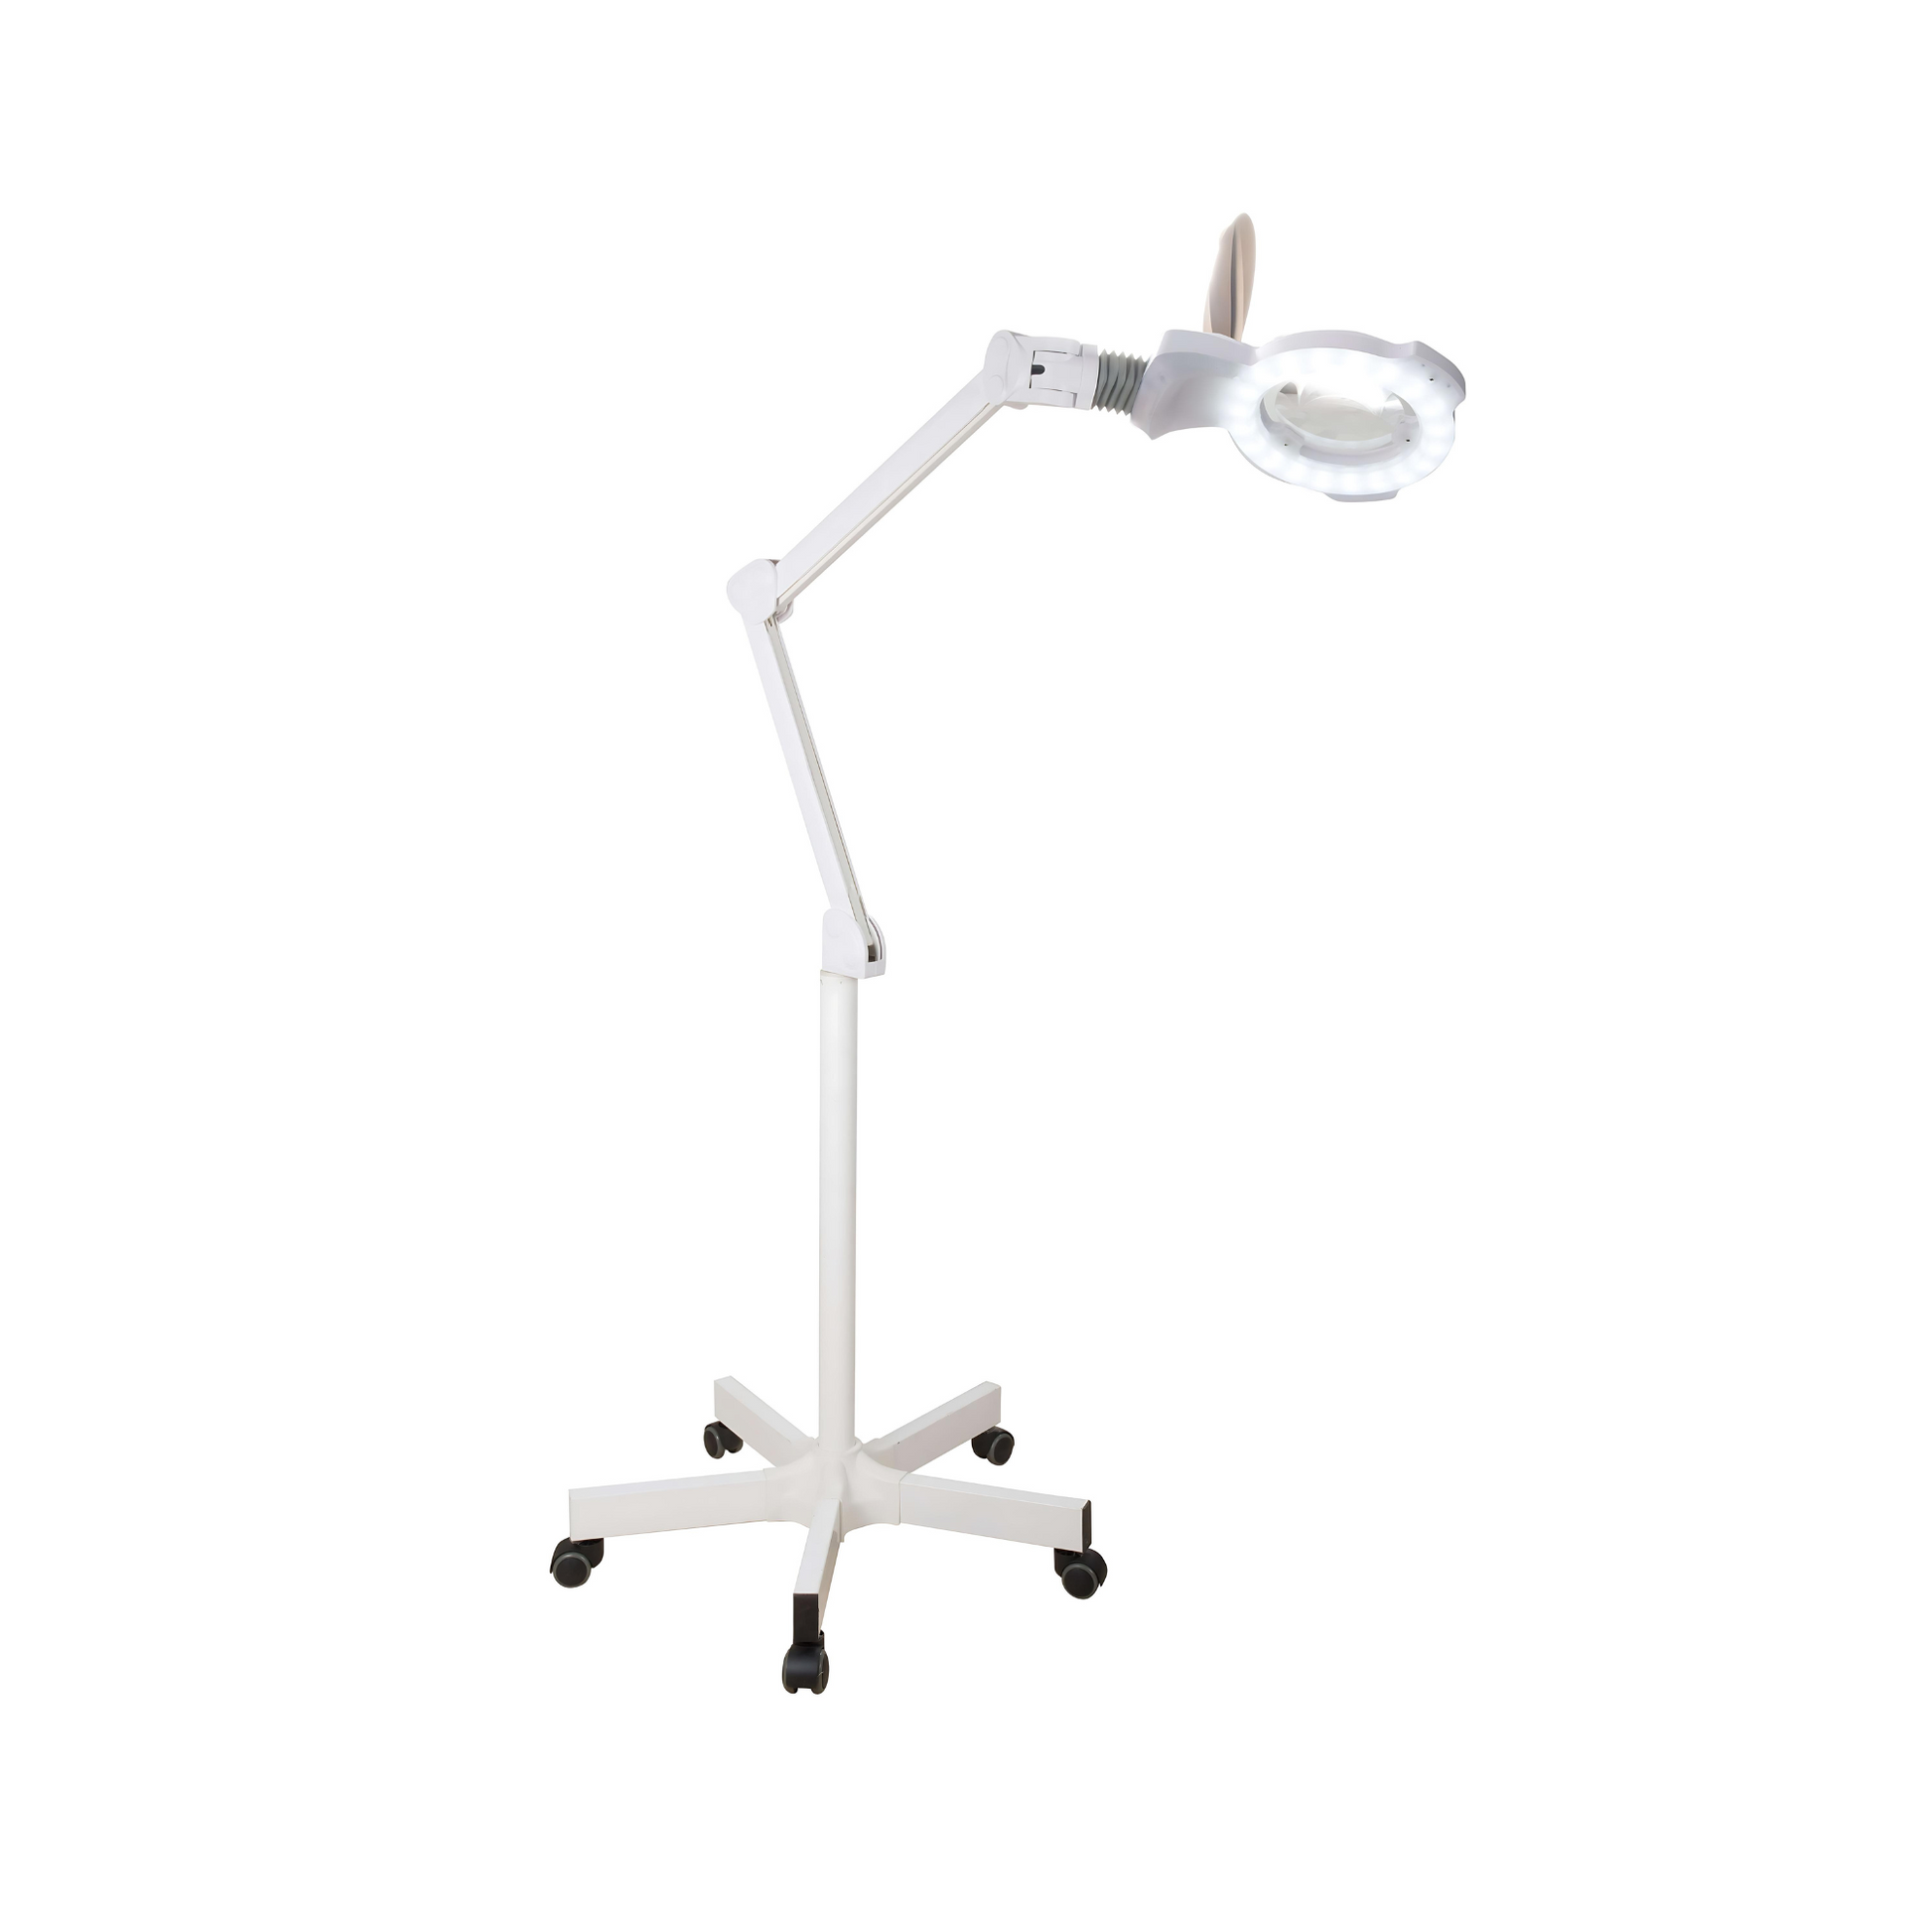 ZaraPlus: Five Diopter LED Magnifying Lamp with 5-Wheel Base With Lights On